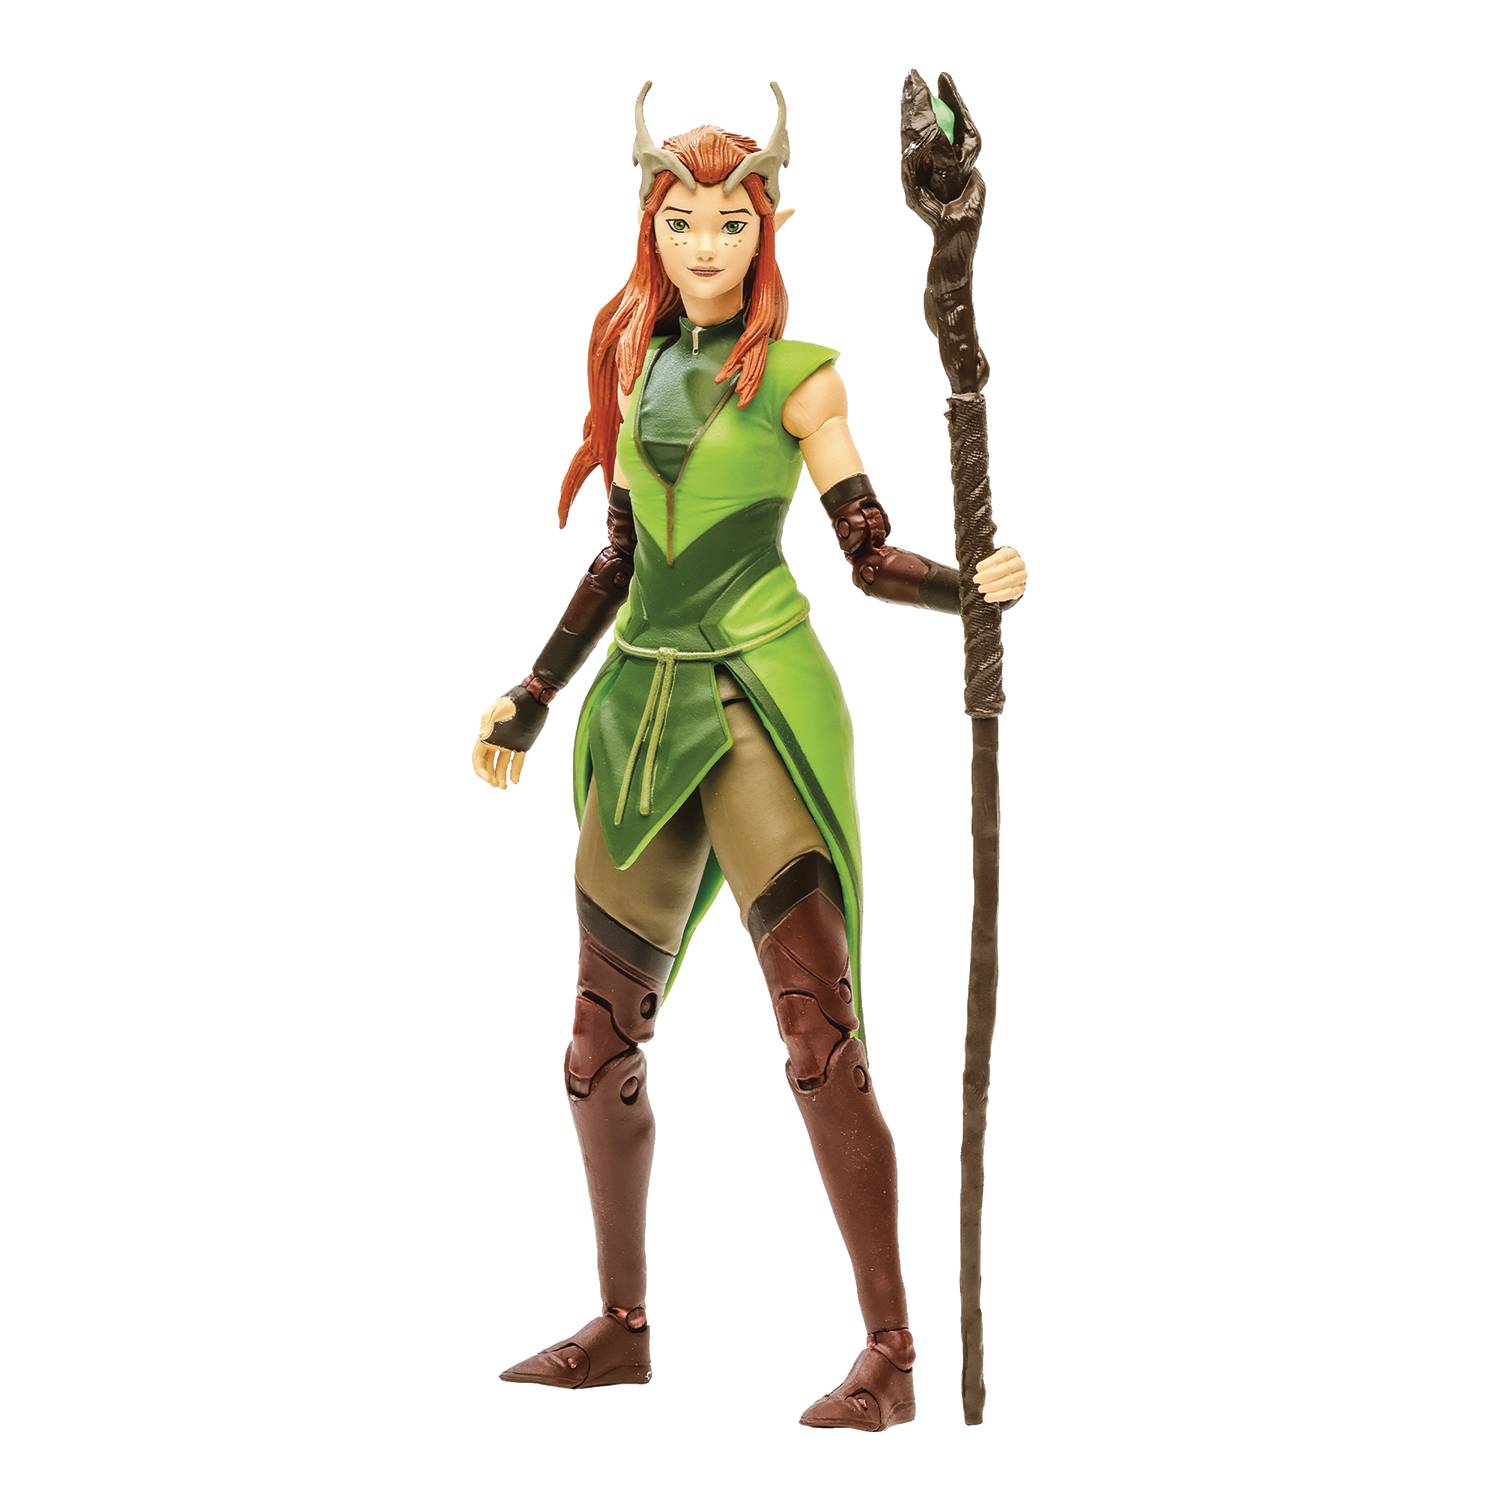 Critical Role Wave 2 Vox Machina Keyleth 7 Inch Action Figure Case